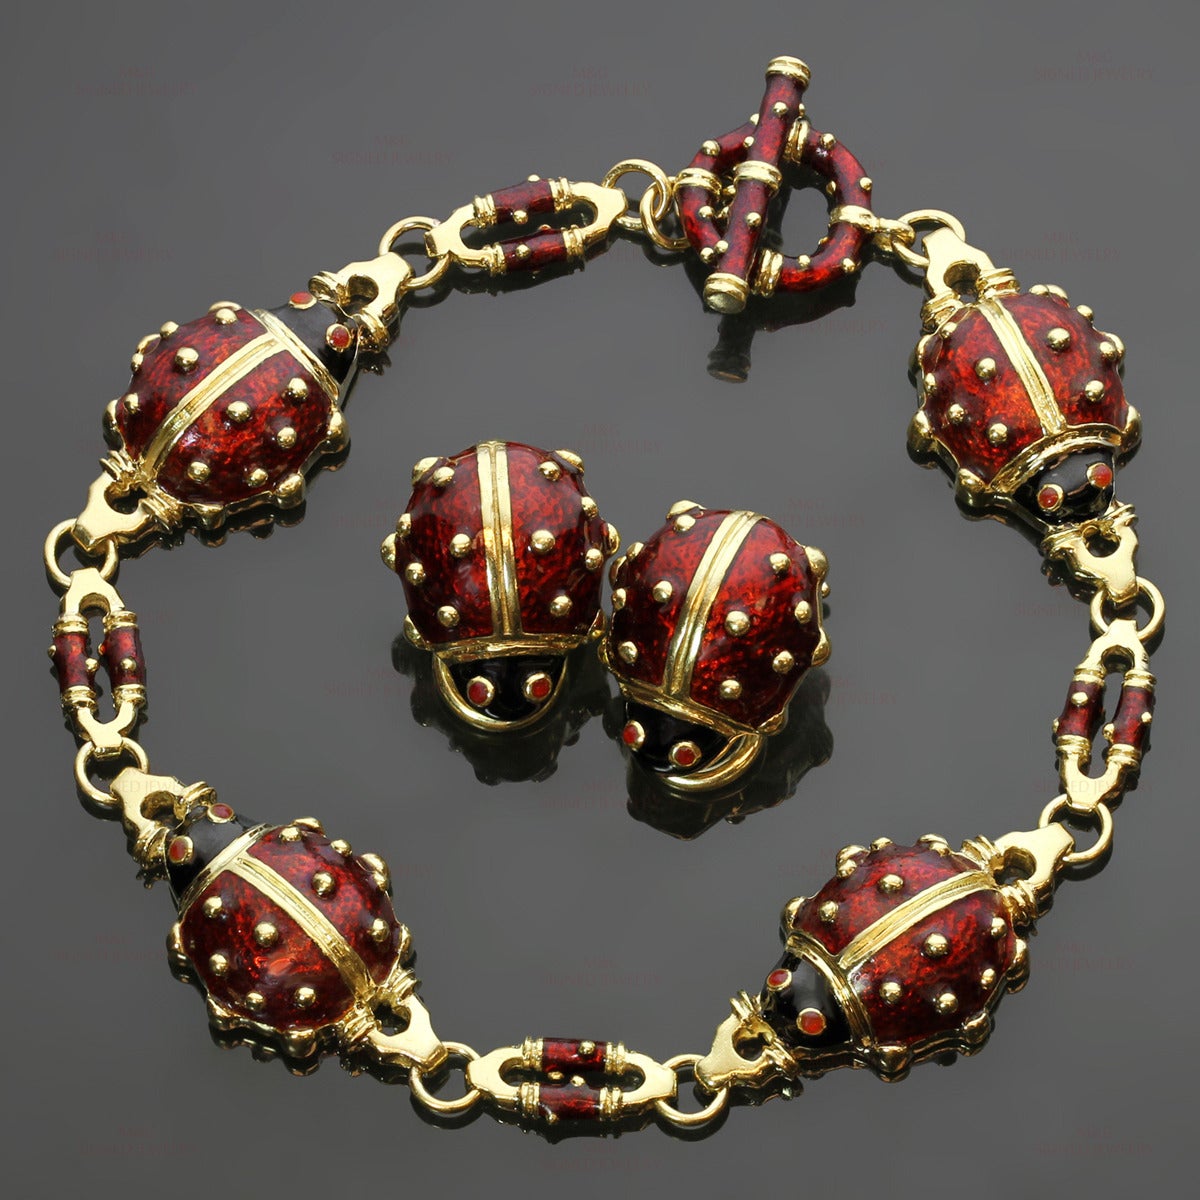 This chic Hidalgo bracelet and earrings set features an adorable ladybug design made in 18k yellow gold and accented with red and black enamel and cabochon ruby eyes. The bracelet is completed with a toggle clasp and the earrings are completed with